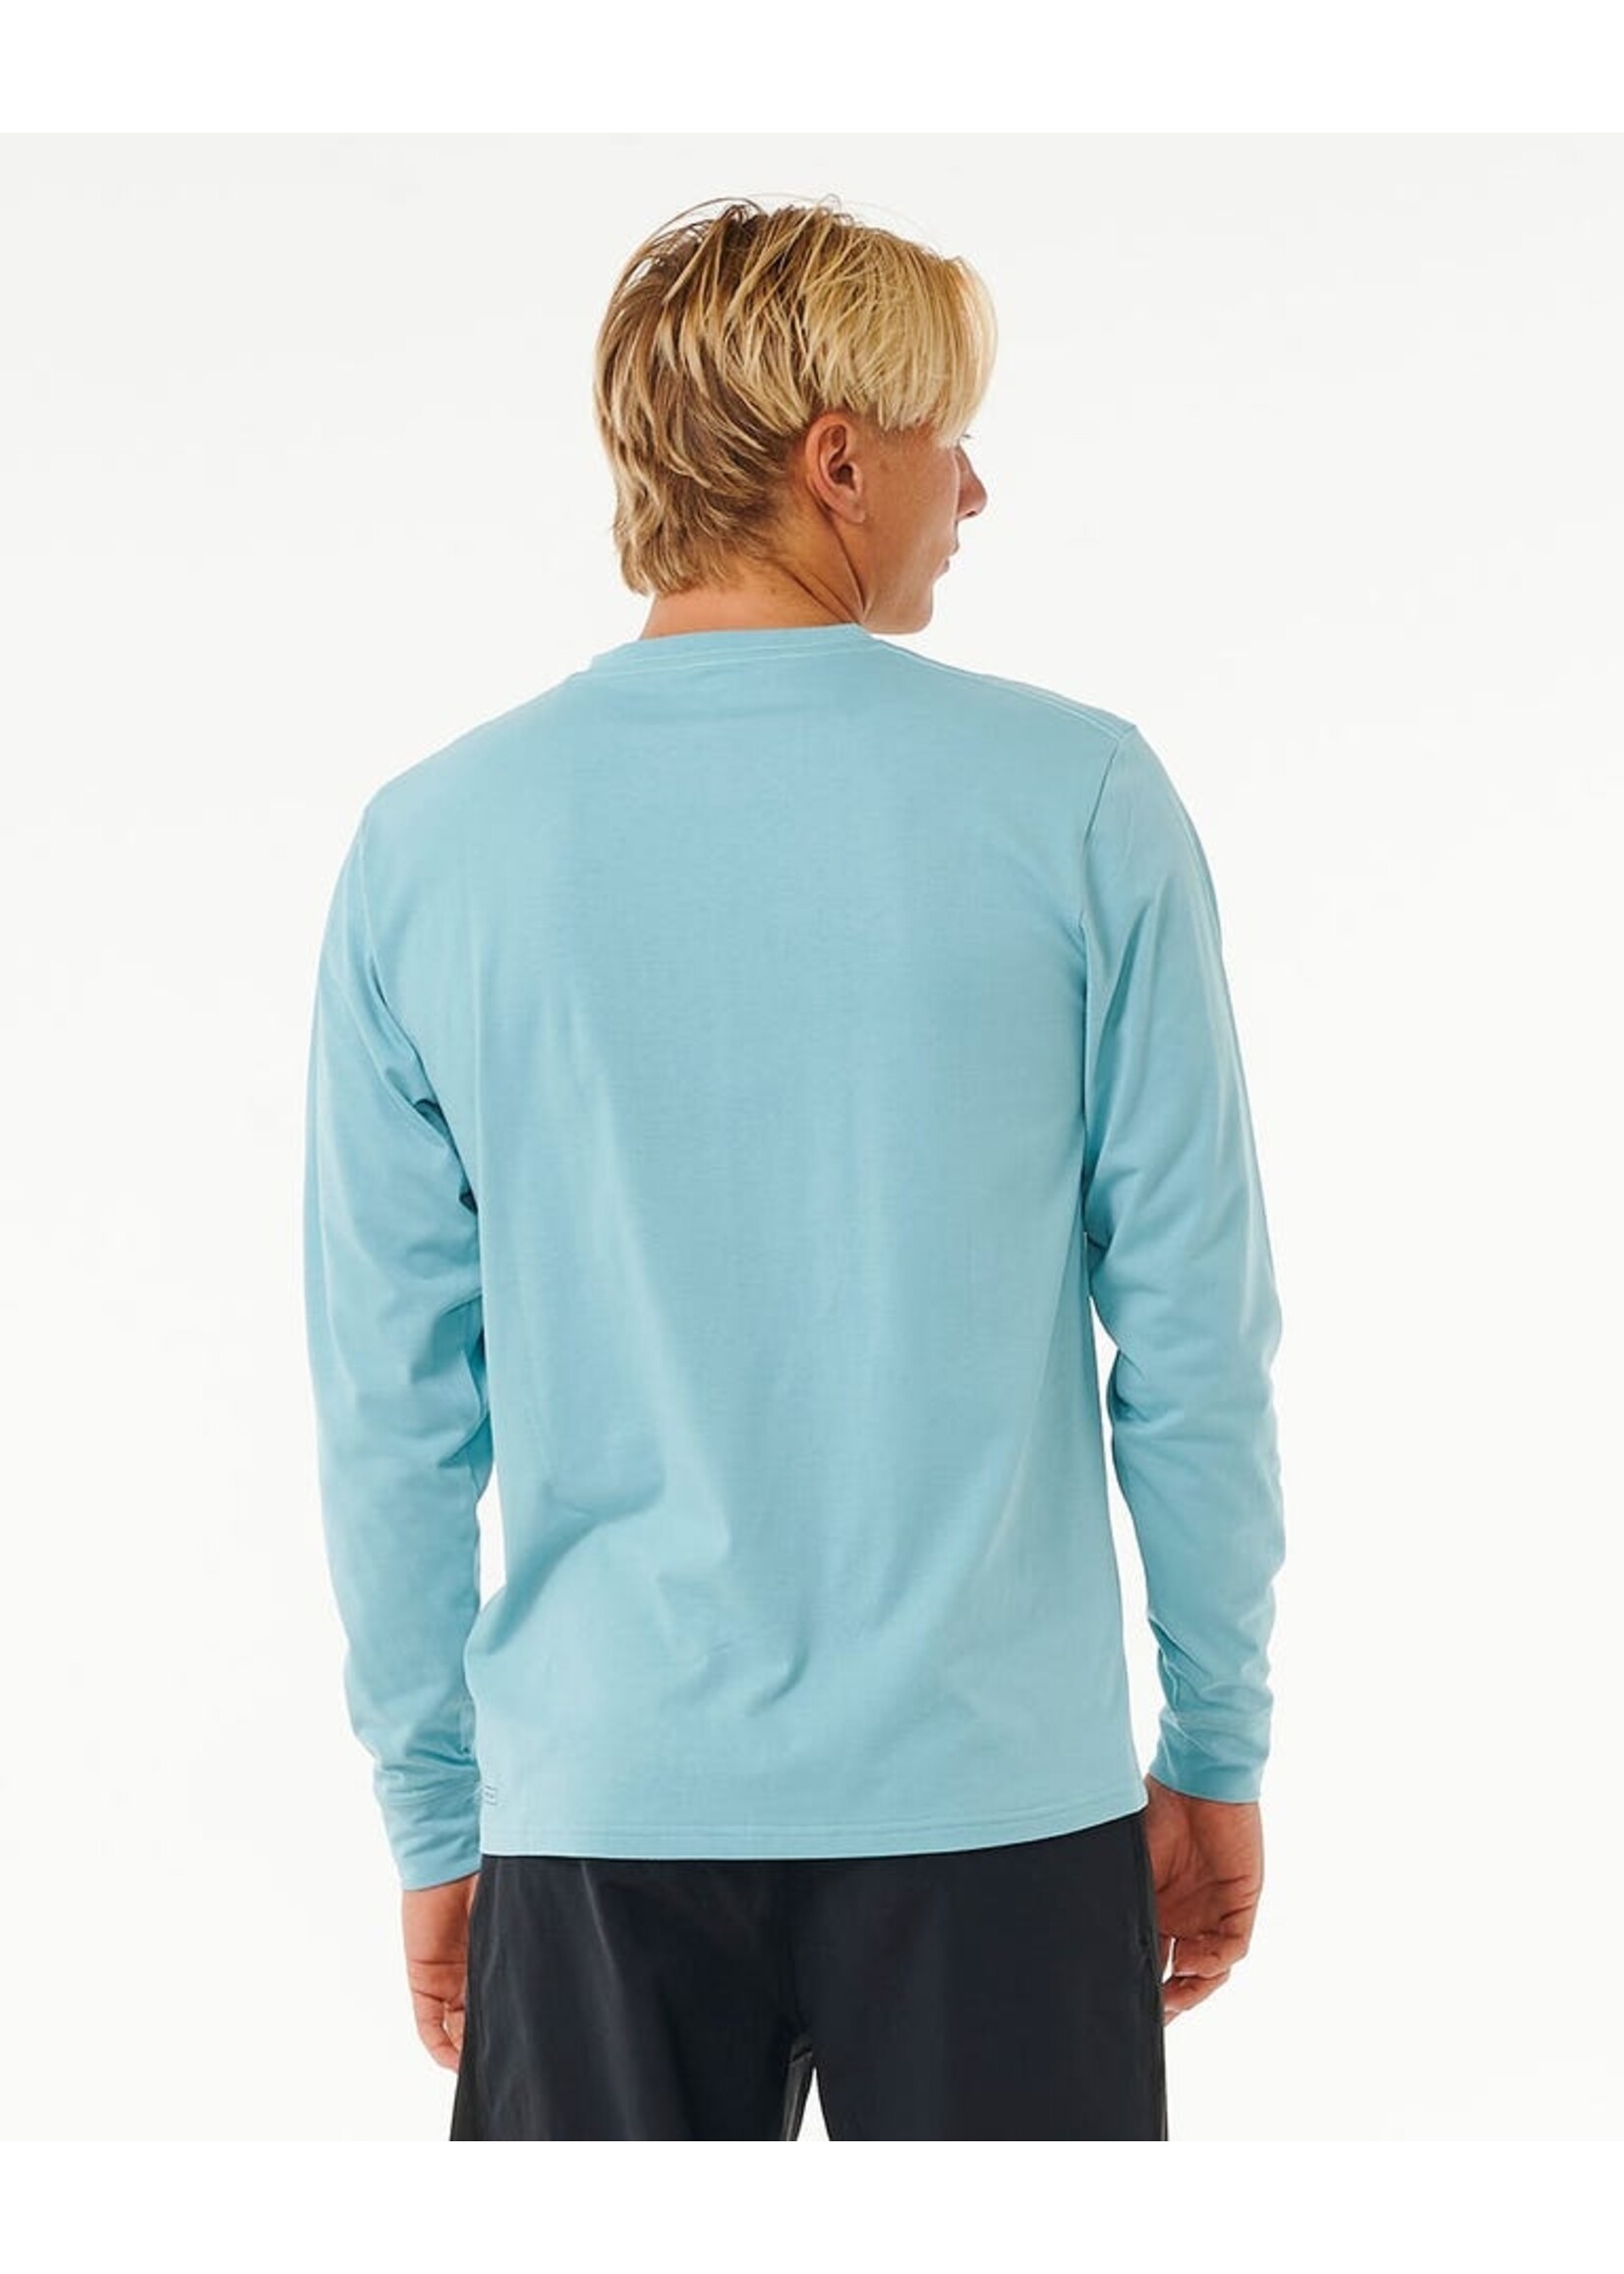 Rip Curl ICONS OF SURF UPF L/S SM24